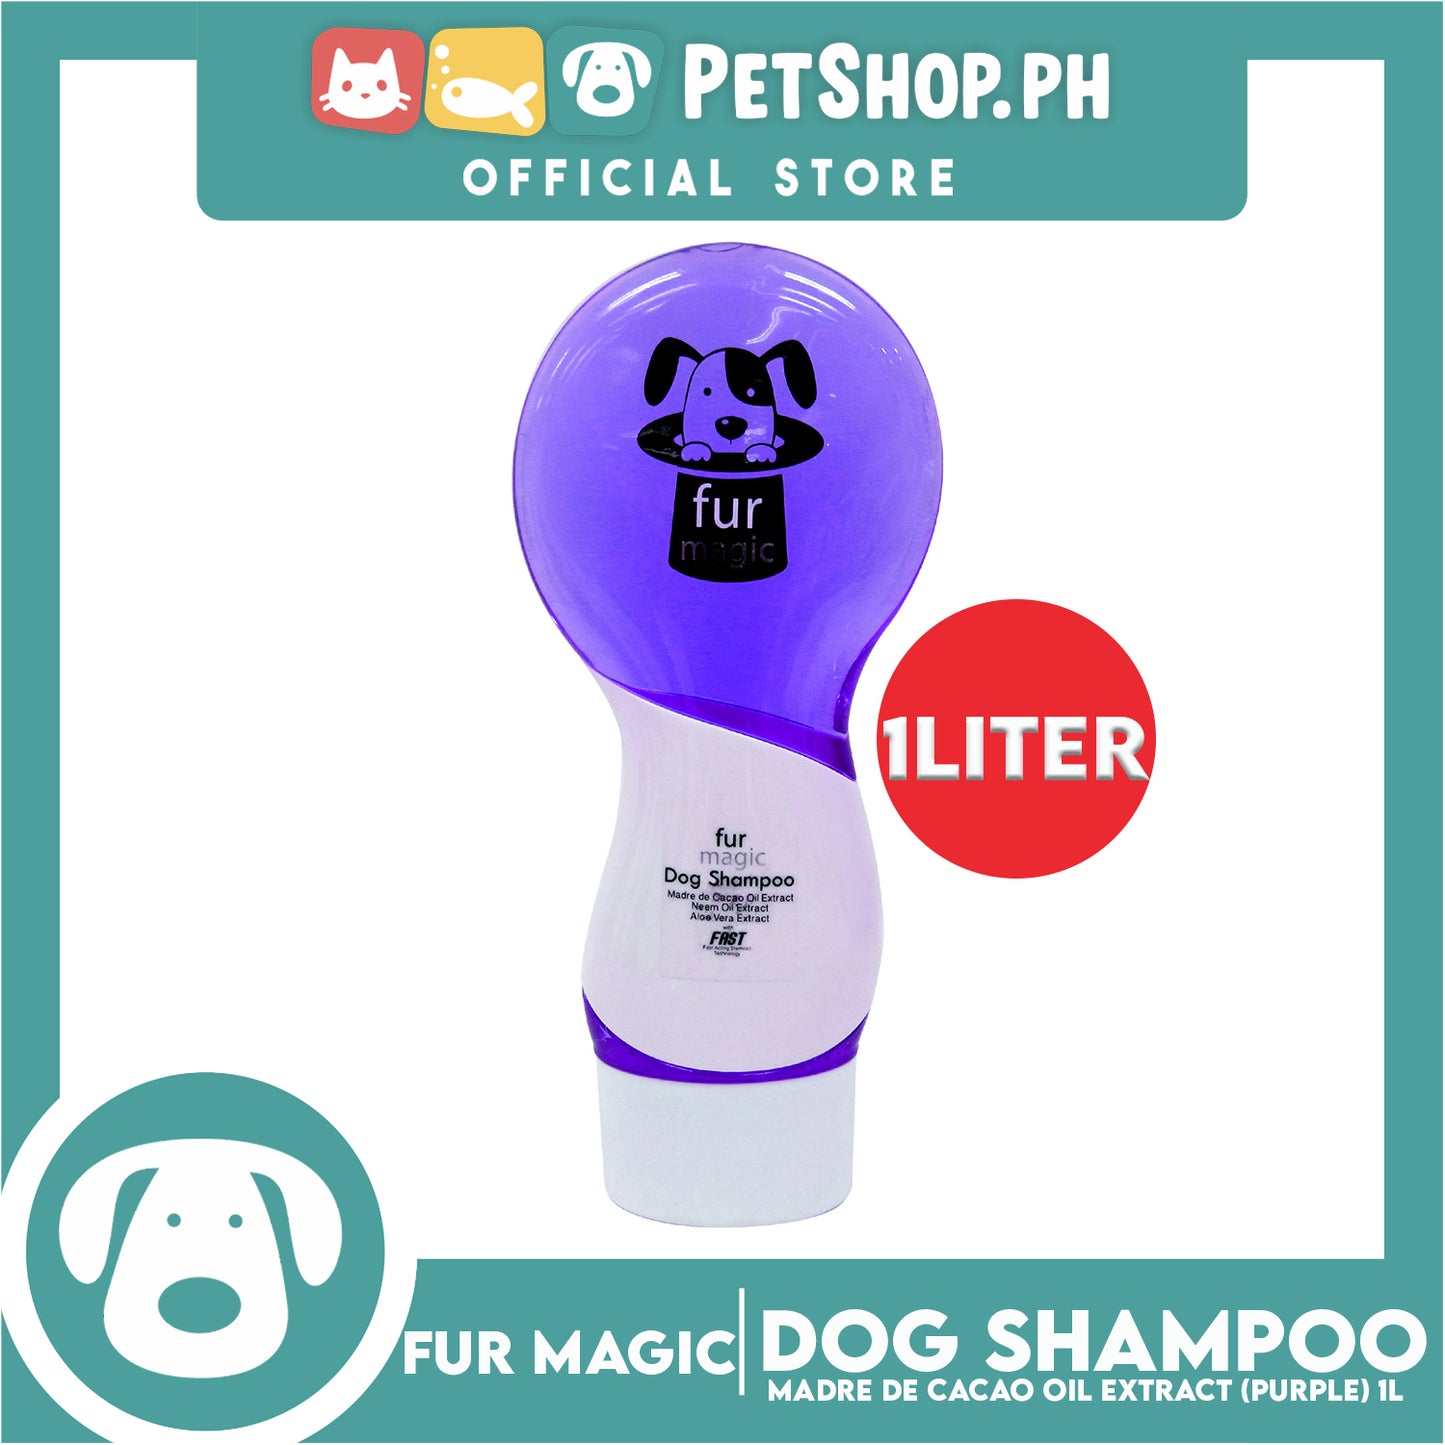 Fur magic with Fast Acting Stemcell Technology (Violet) 1000ml Dog Shampoo